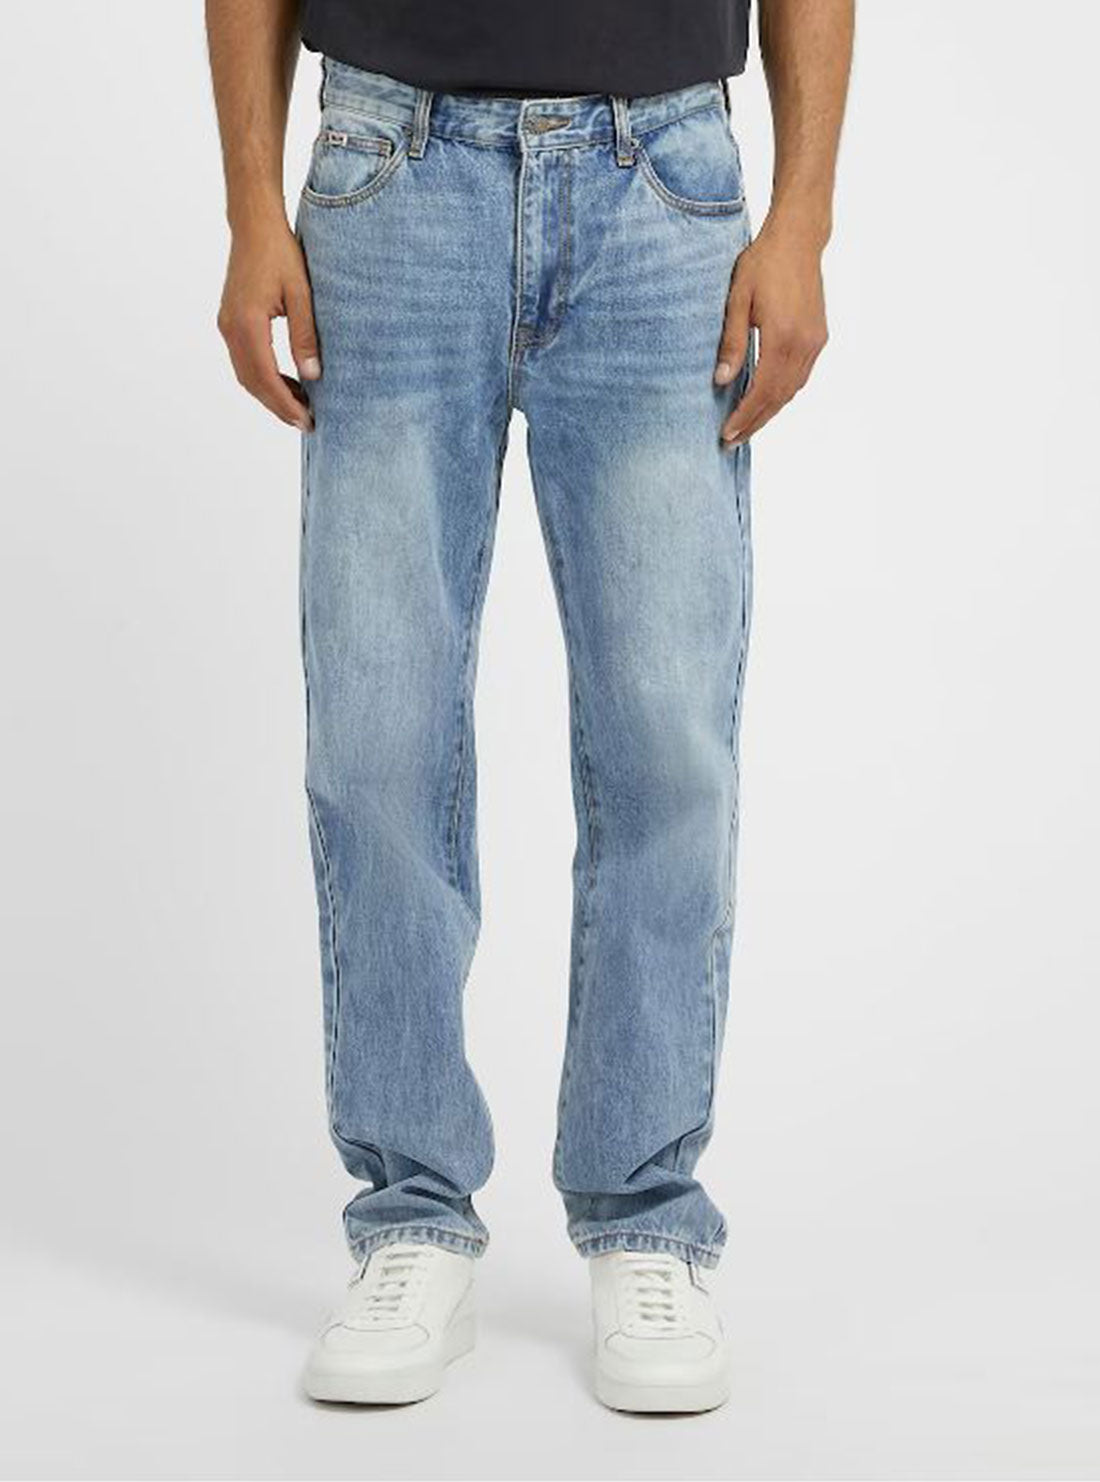 GUESS Men's Guess Originals Mid-Rise Straight Leg Denim Jeans In Leo Light Wash M3GG45D4XY0 Front View